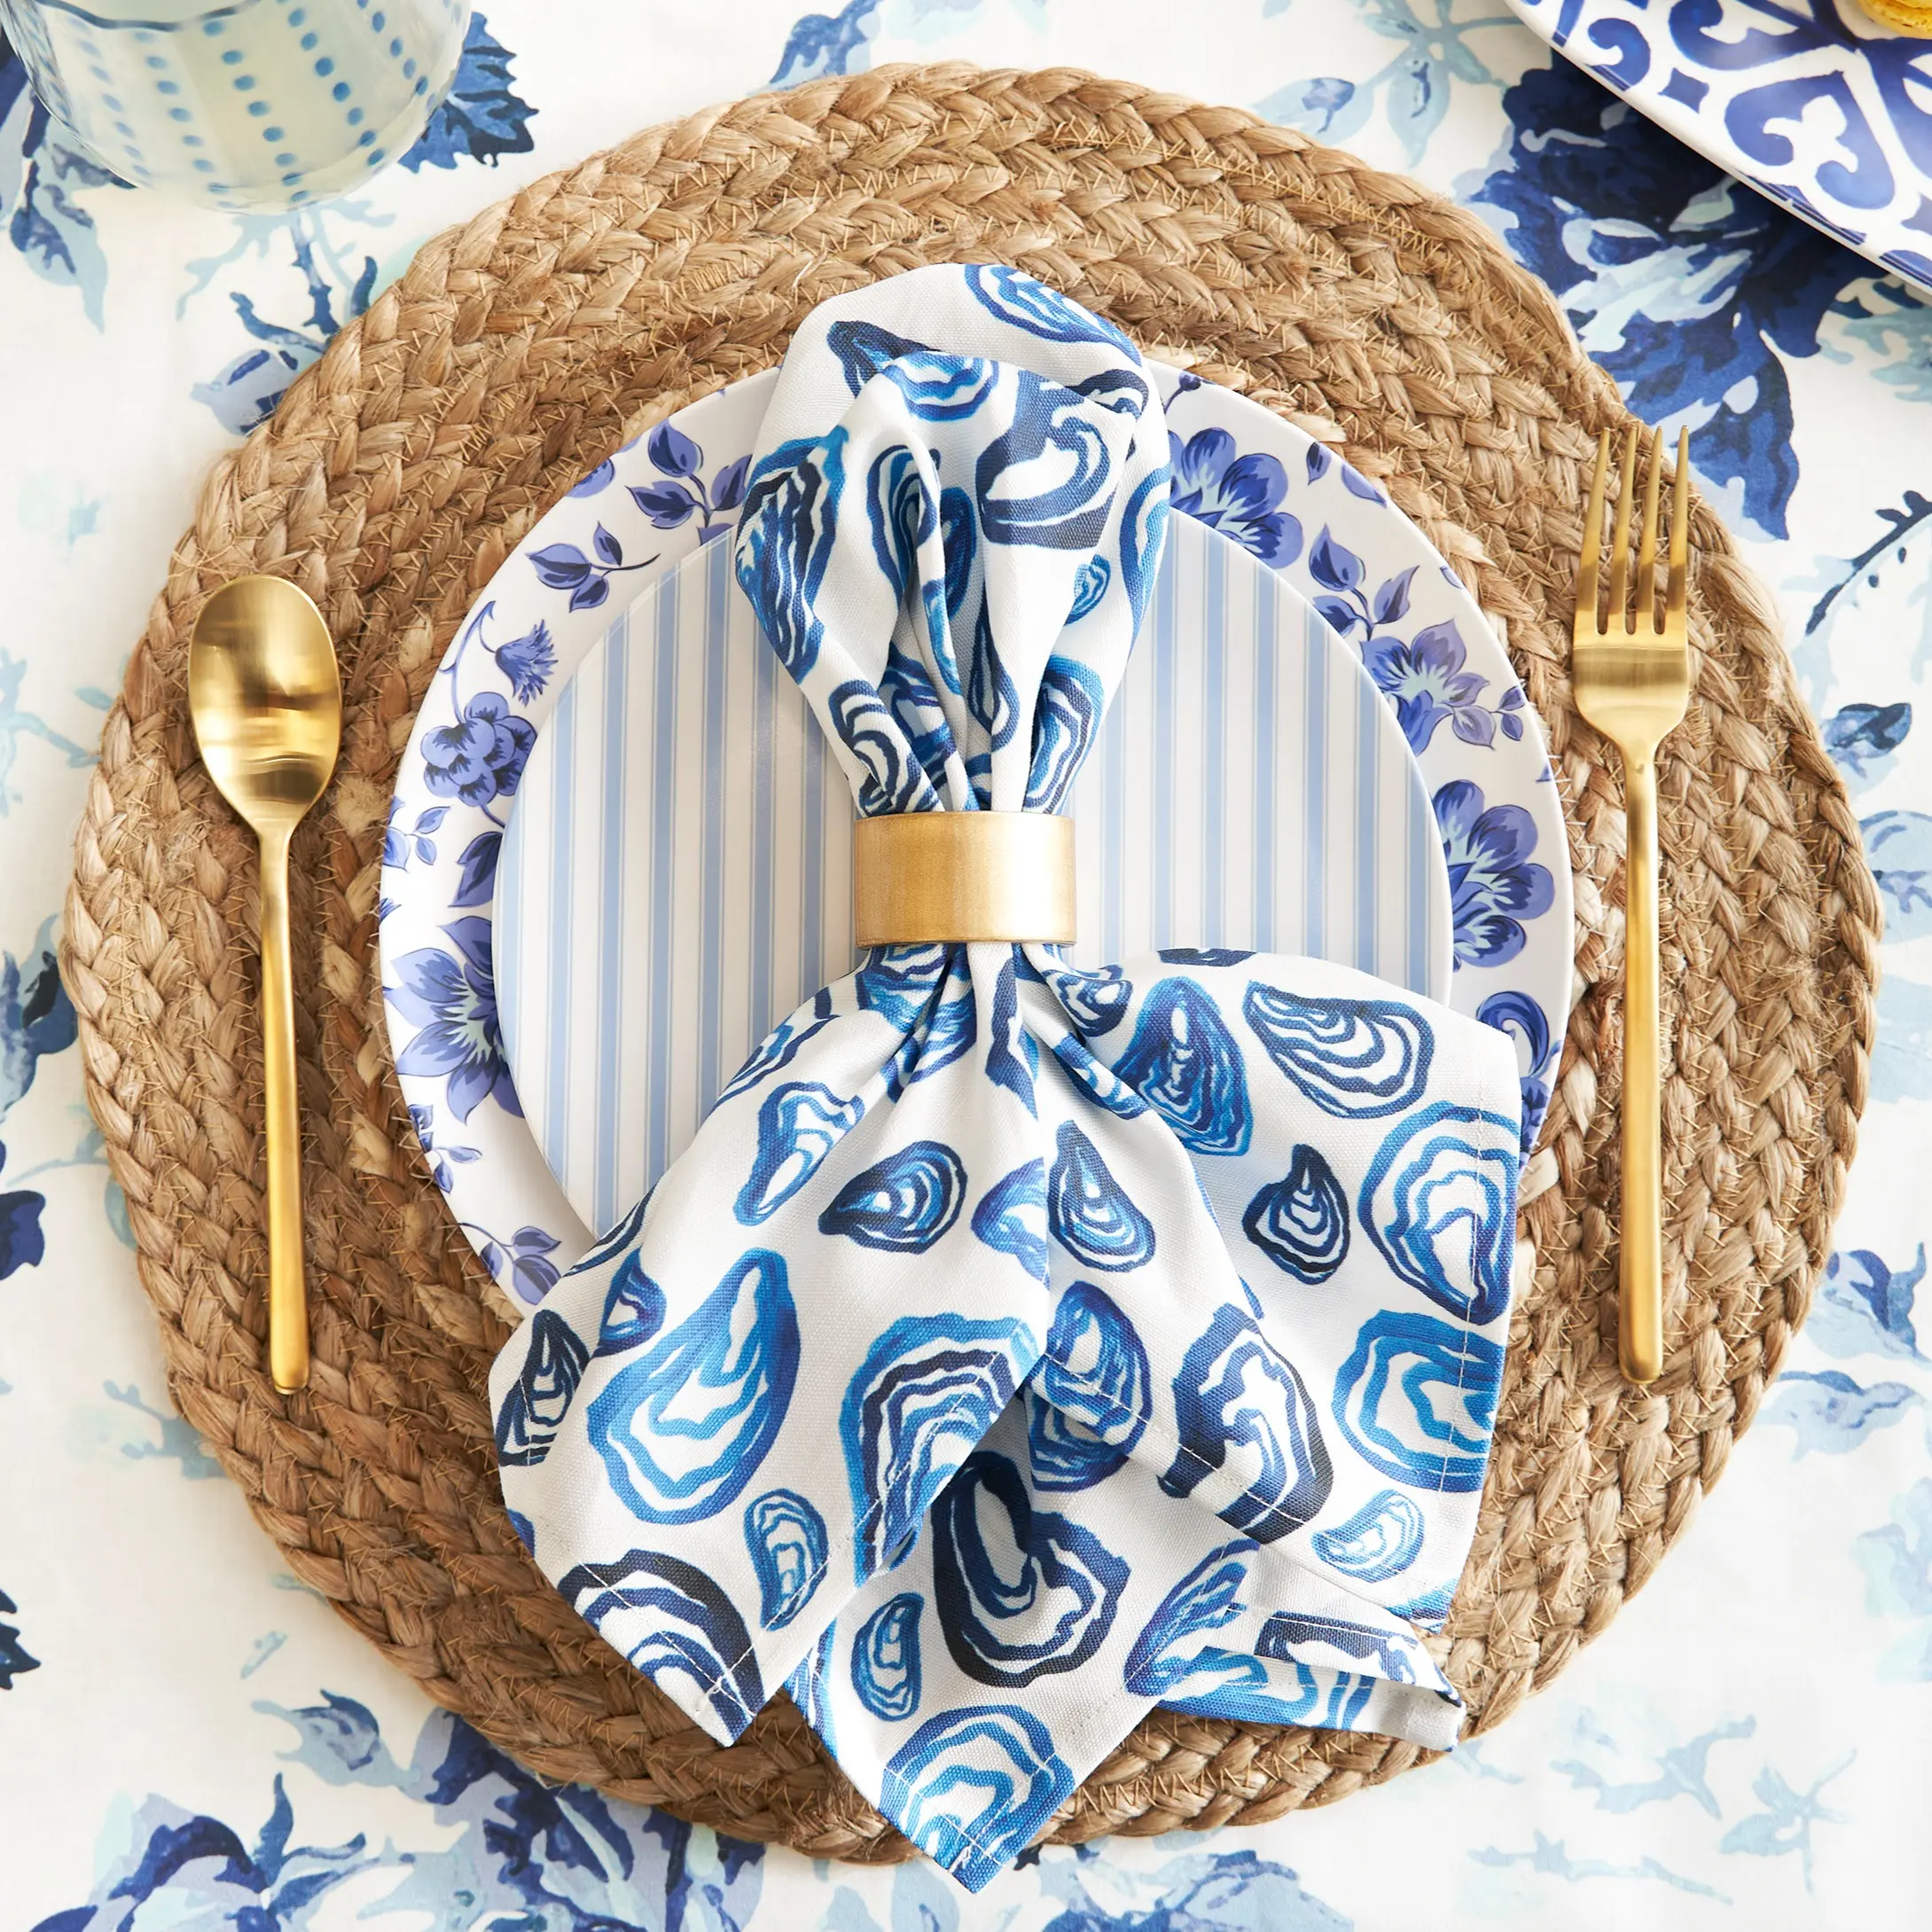 Oyster pattern dinner napkin in napkin ring on dining table